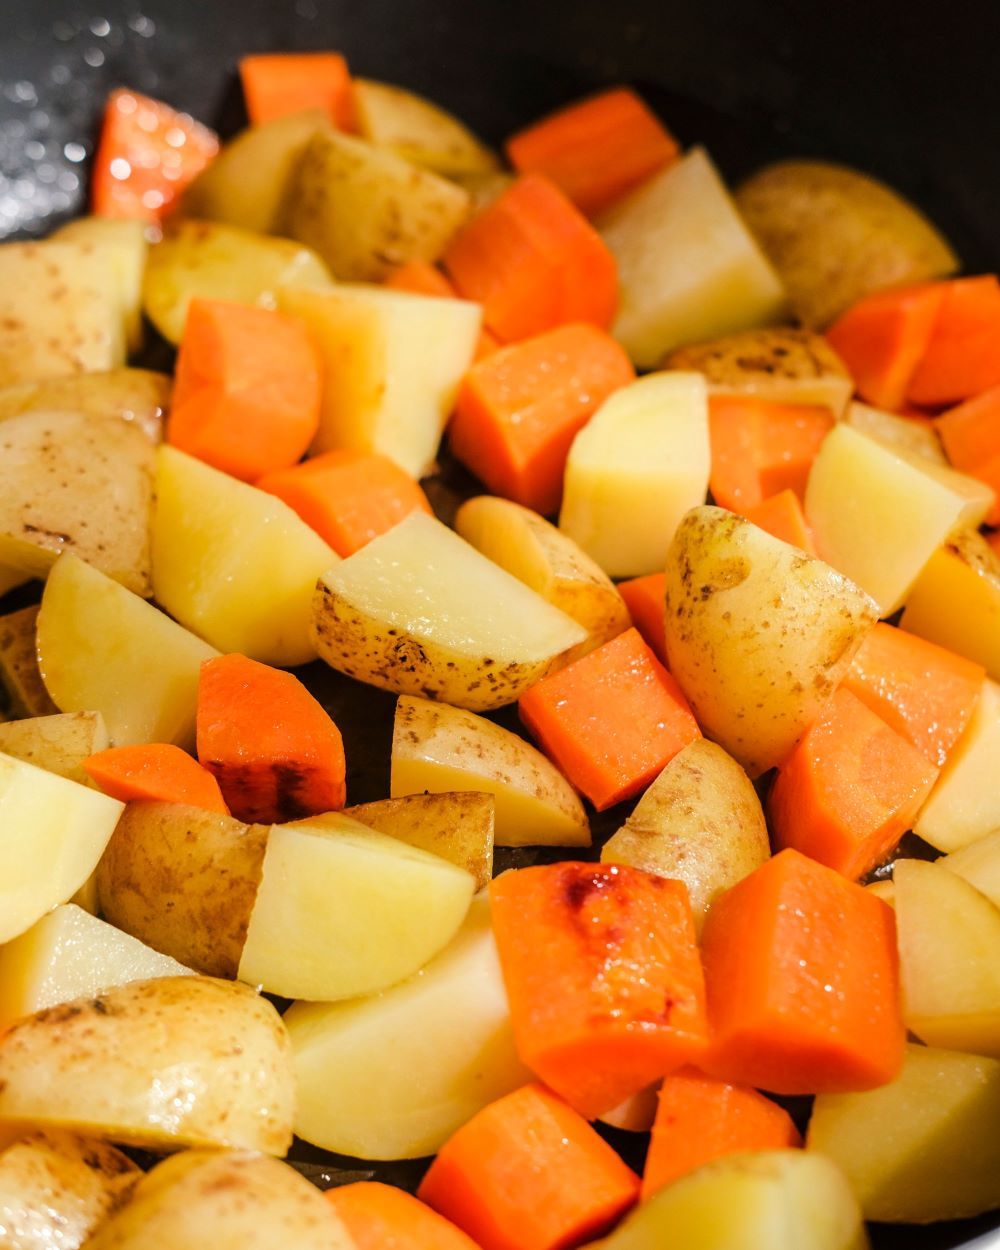 Sauteing Carrots and Potatoes